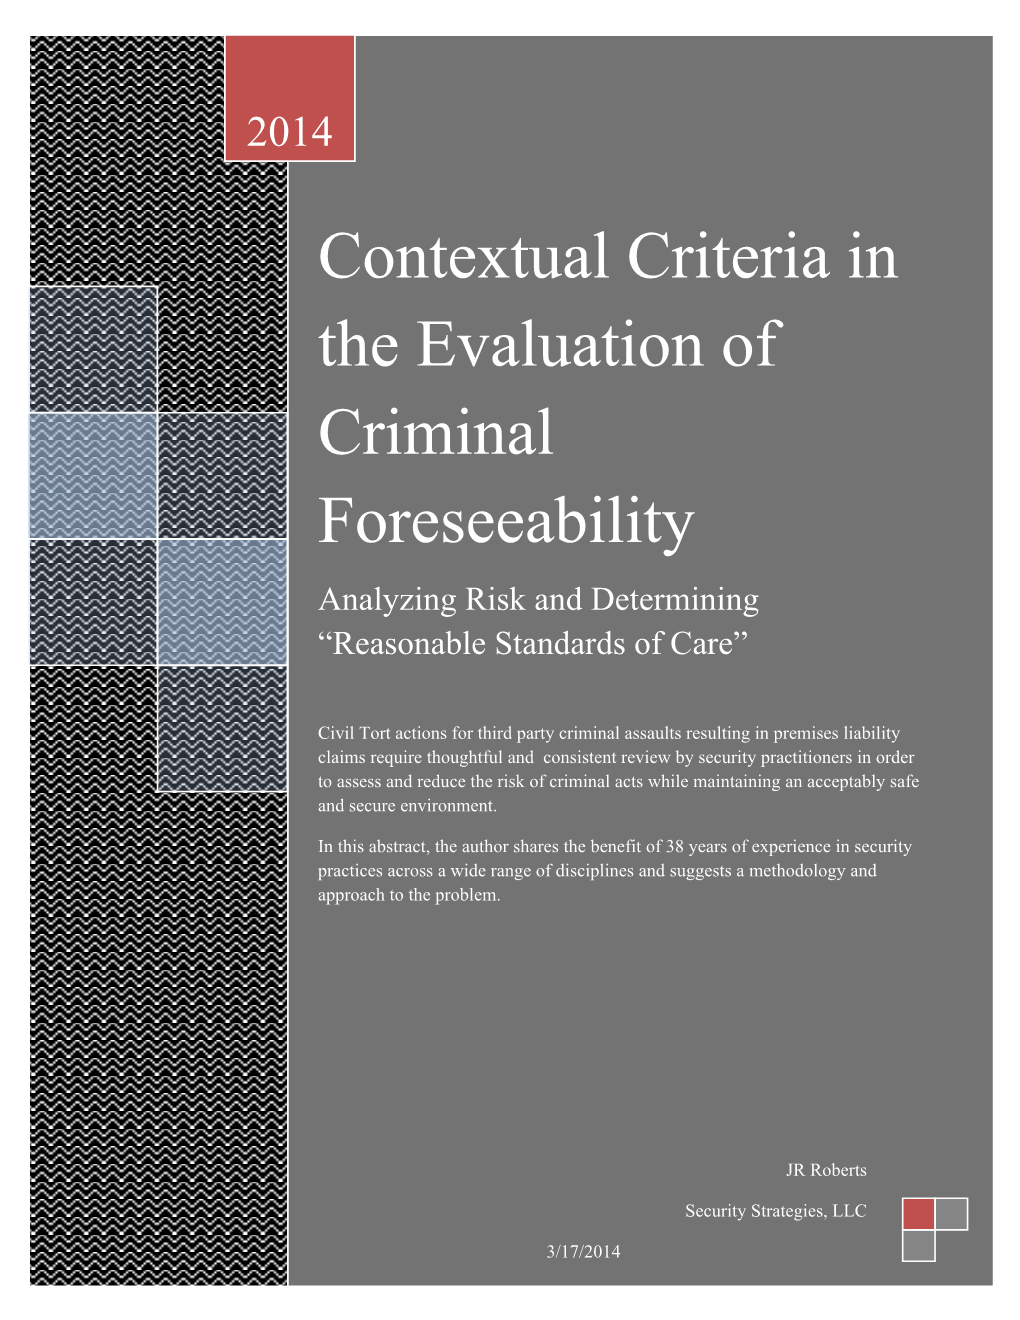 Contextual Criteria in the Evaluation of Criminal Foreseeability